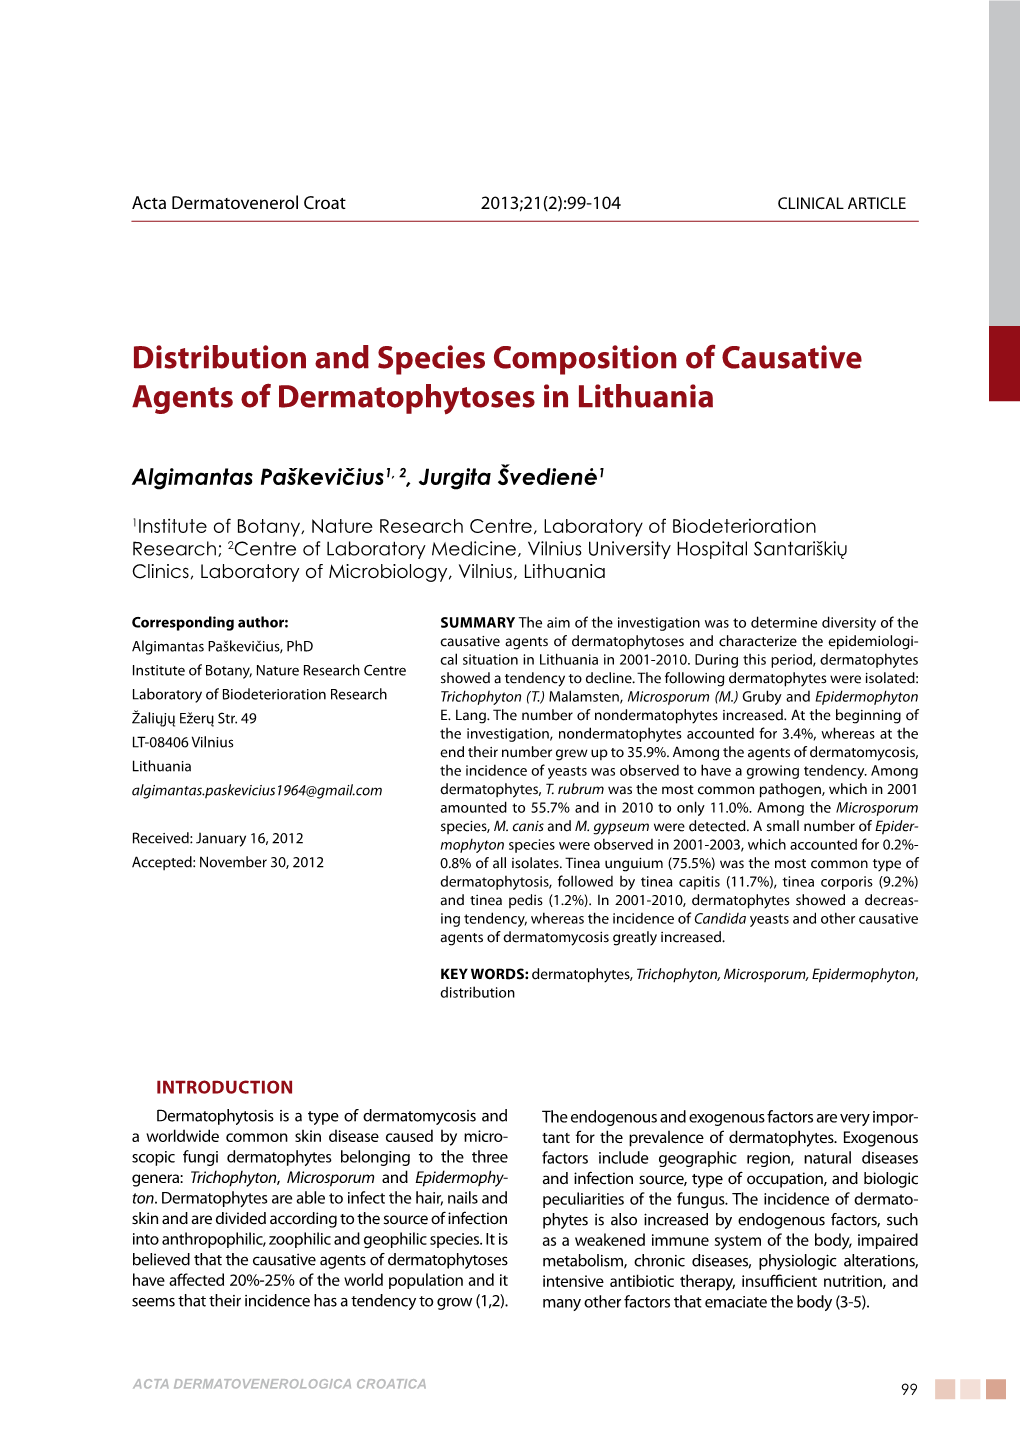 Distribution and Species Composition of Causative Agents of Dermatophytoses in Lithuania